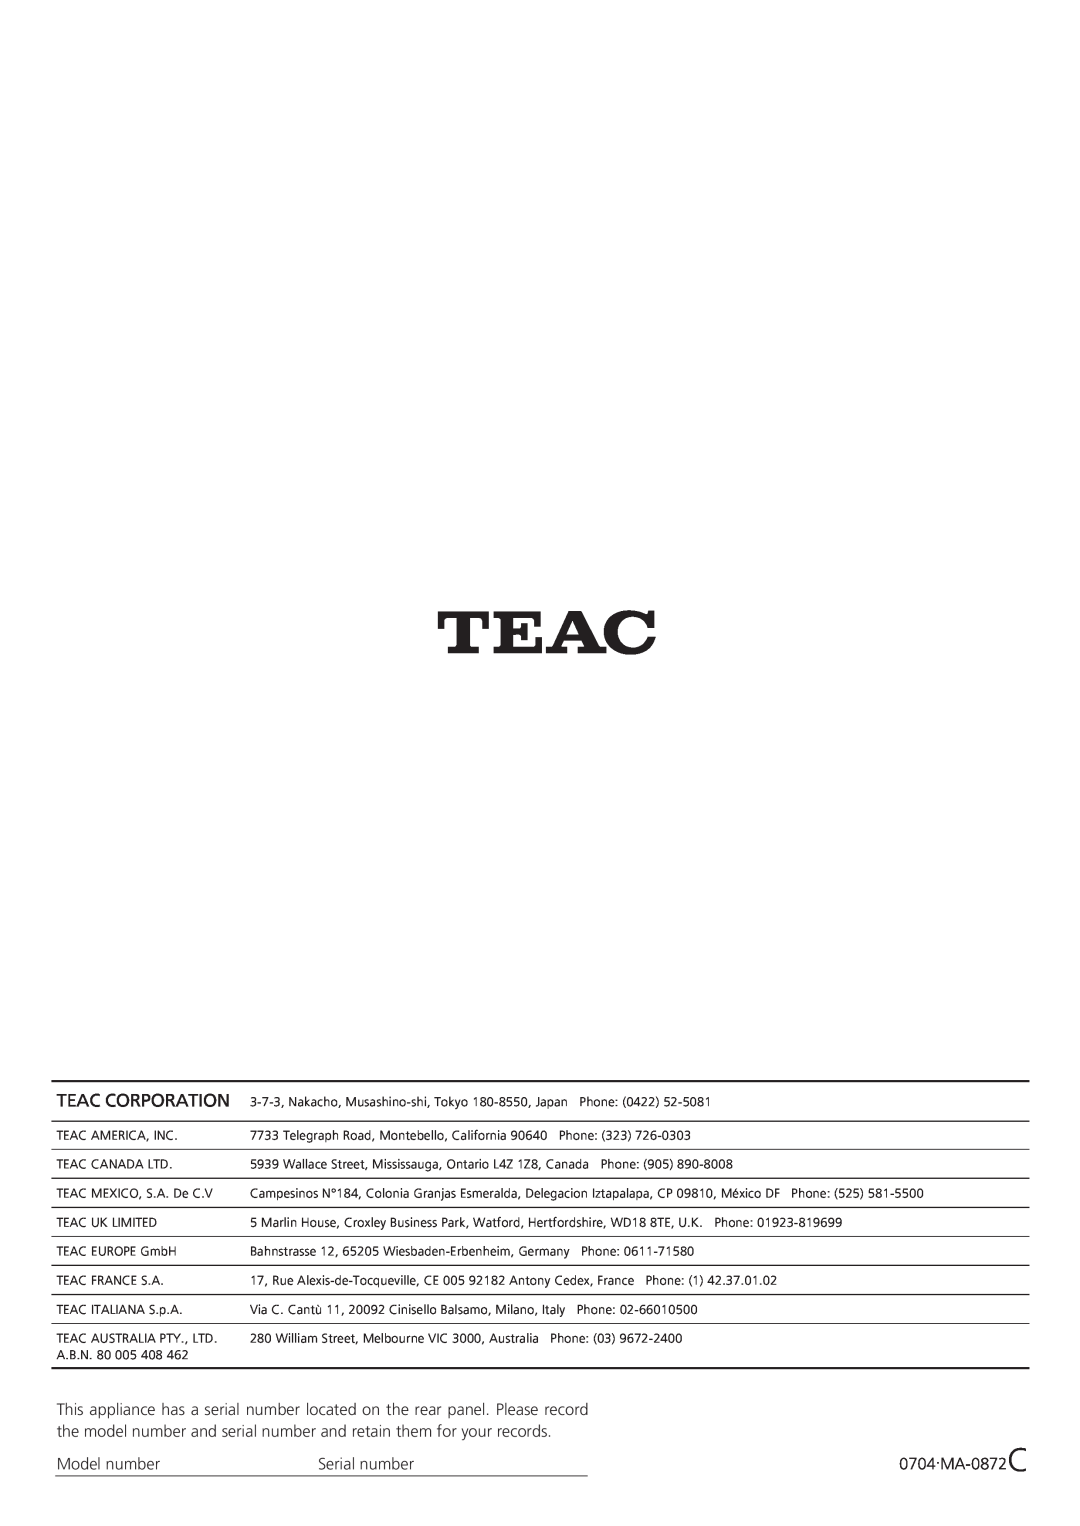 Teac A-H300mkII owner manual Teac Corporation, Model number, Serial number, 0704.MA-0872C 